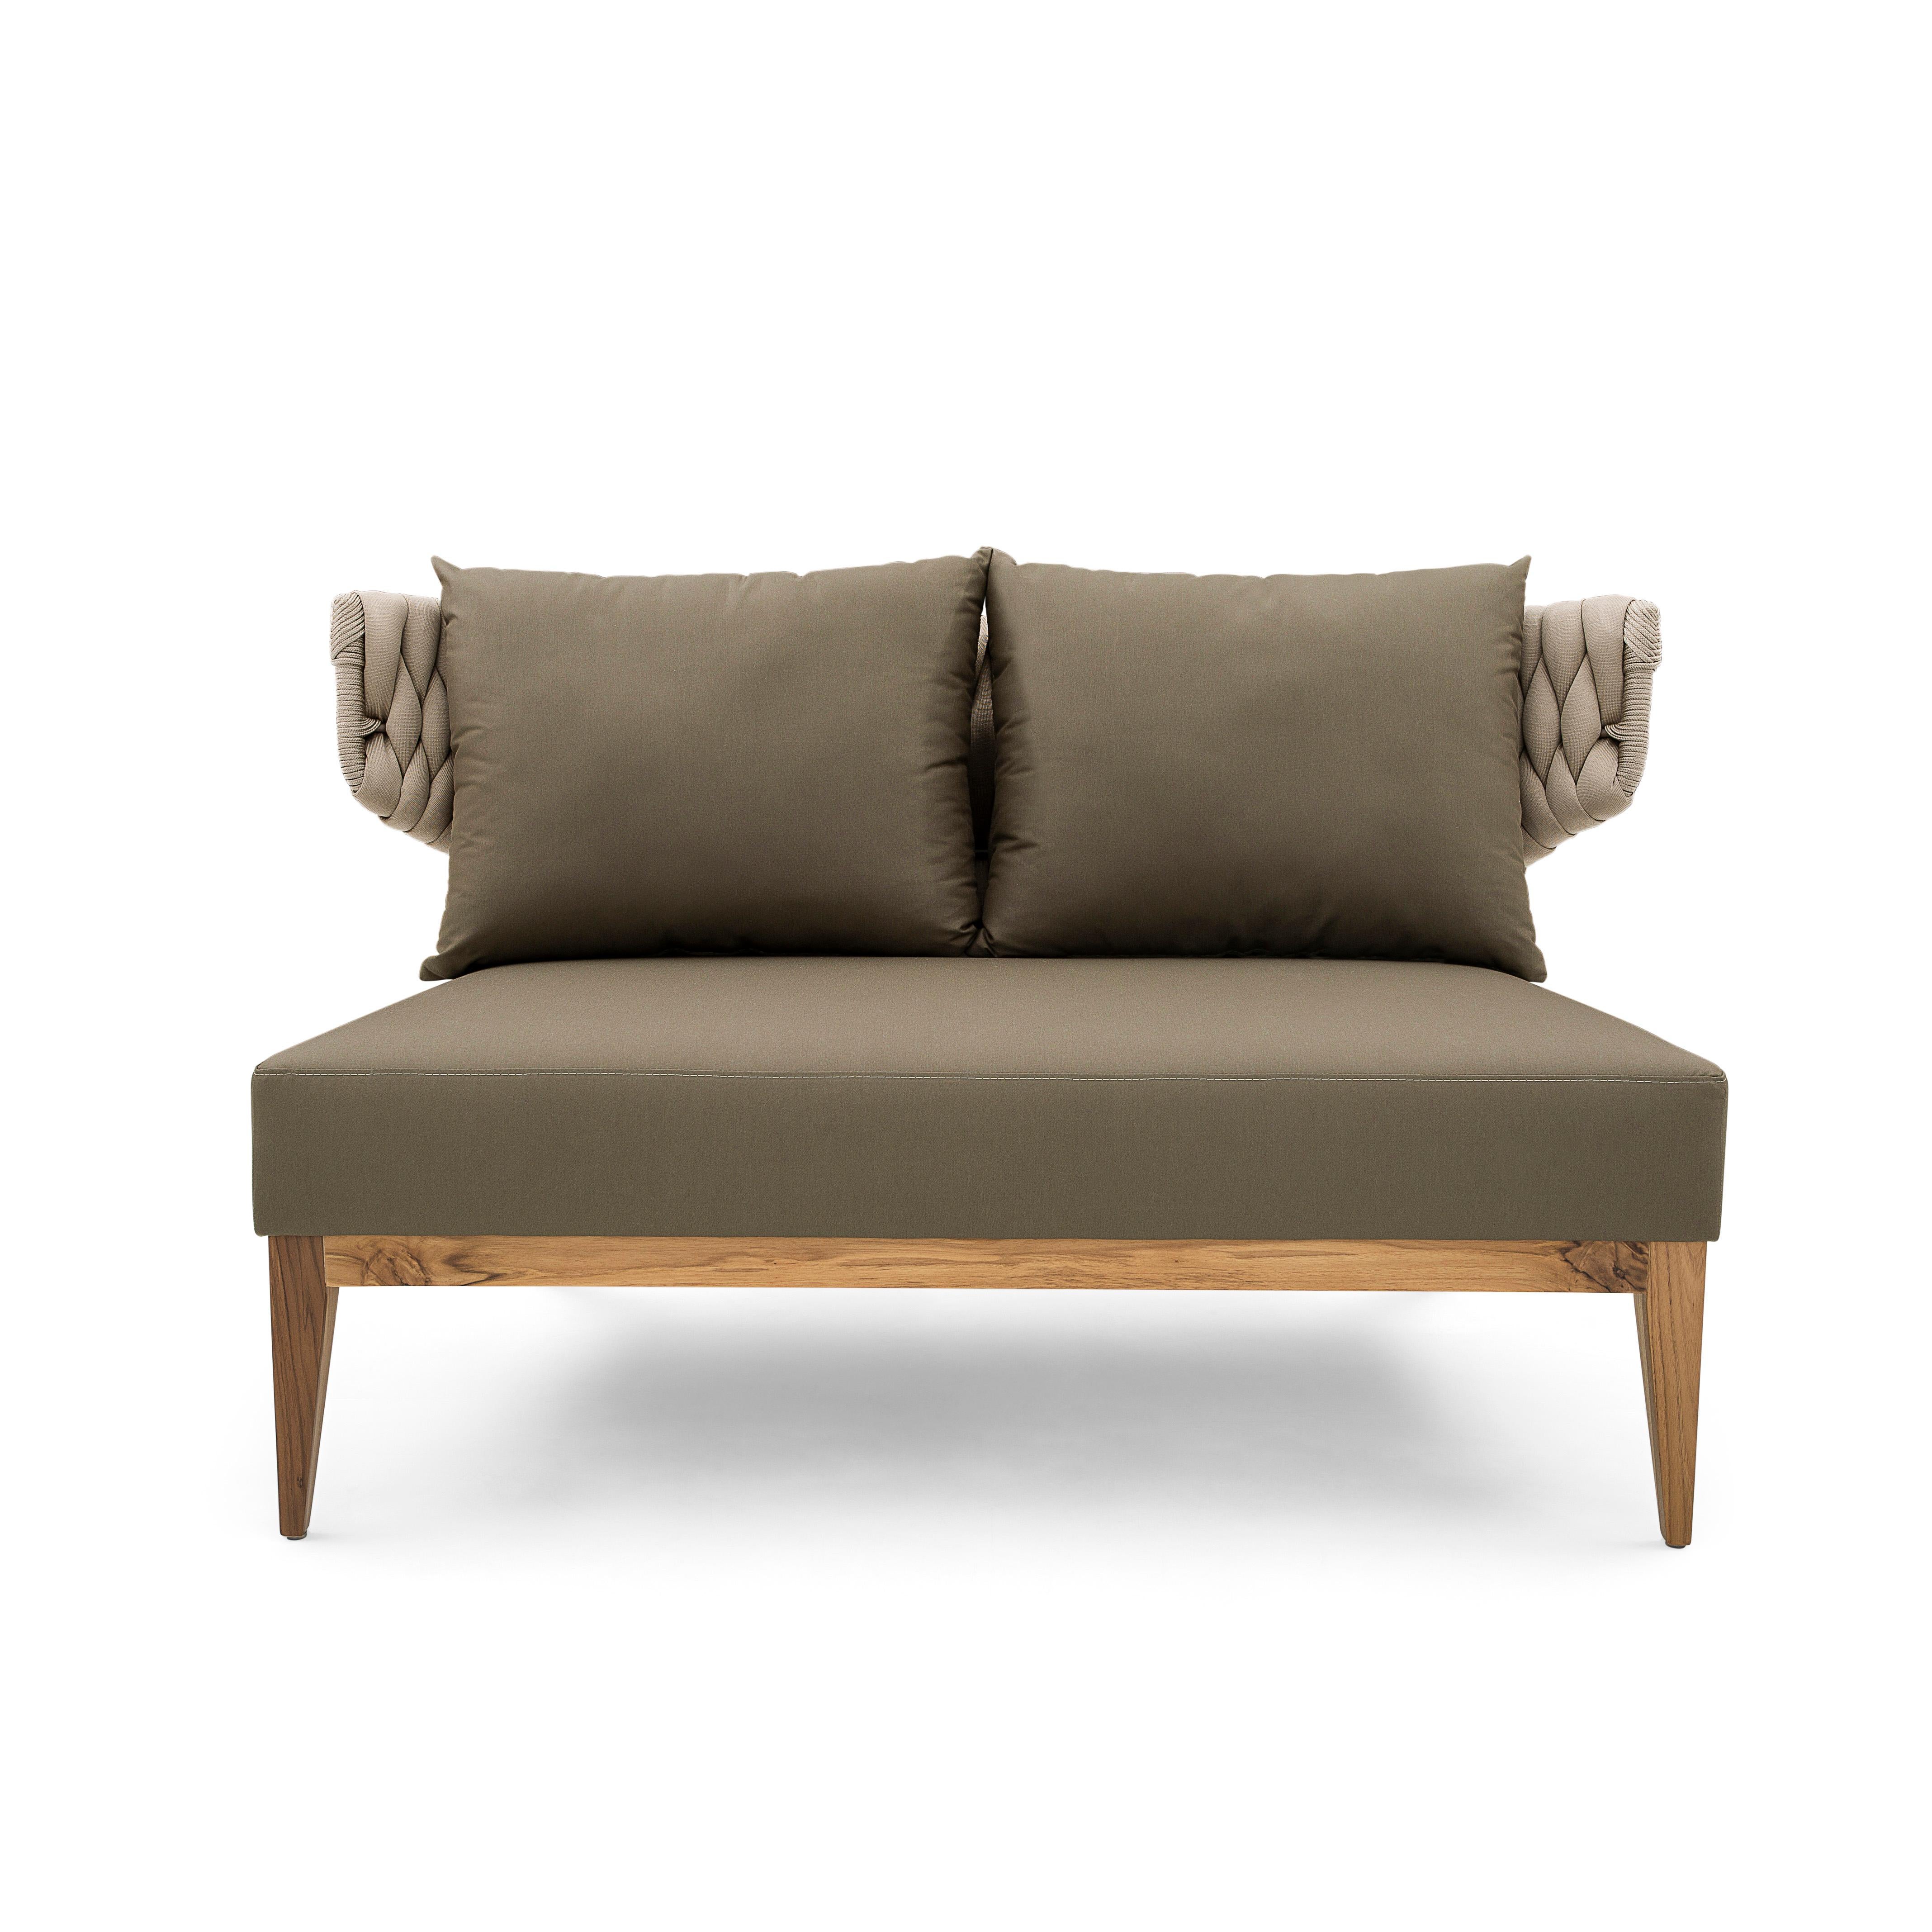 The Beluga loveseat is the perfect combination of a monochromatic green fabric covering the seat, pillows, and back, with wood legs in a teak finish to match this contemporary design. Uultis have designed this incredible armchair to give you the